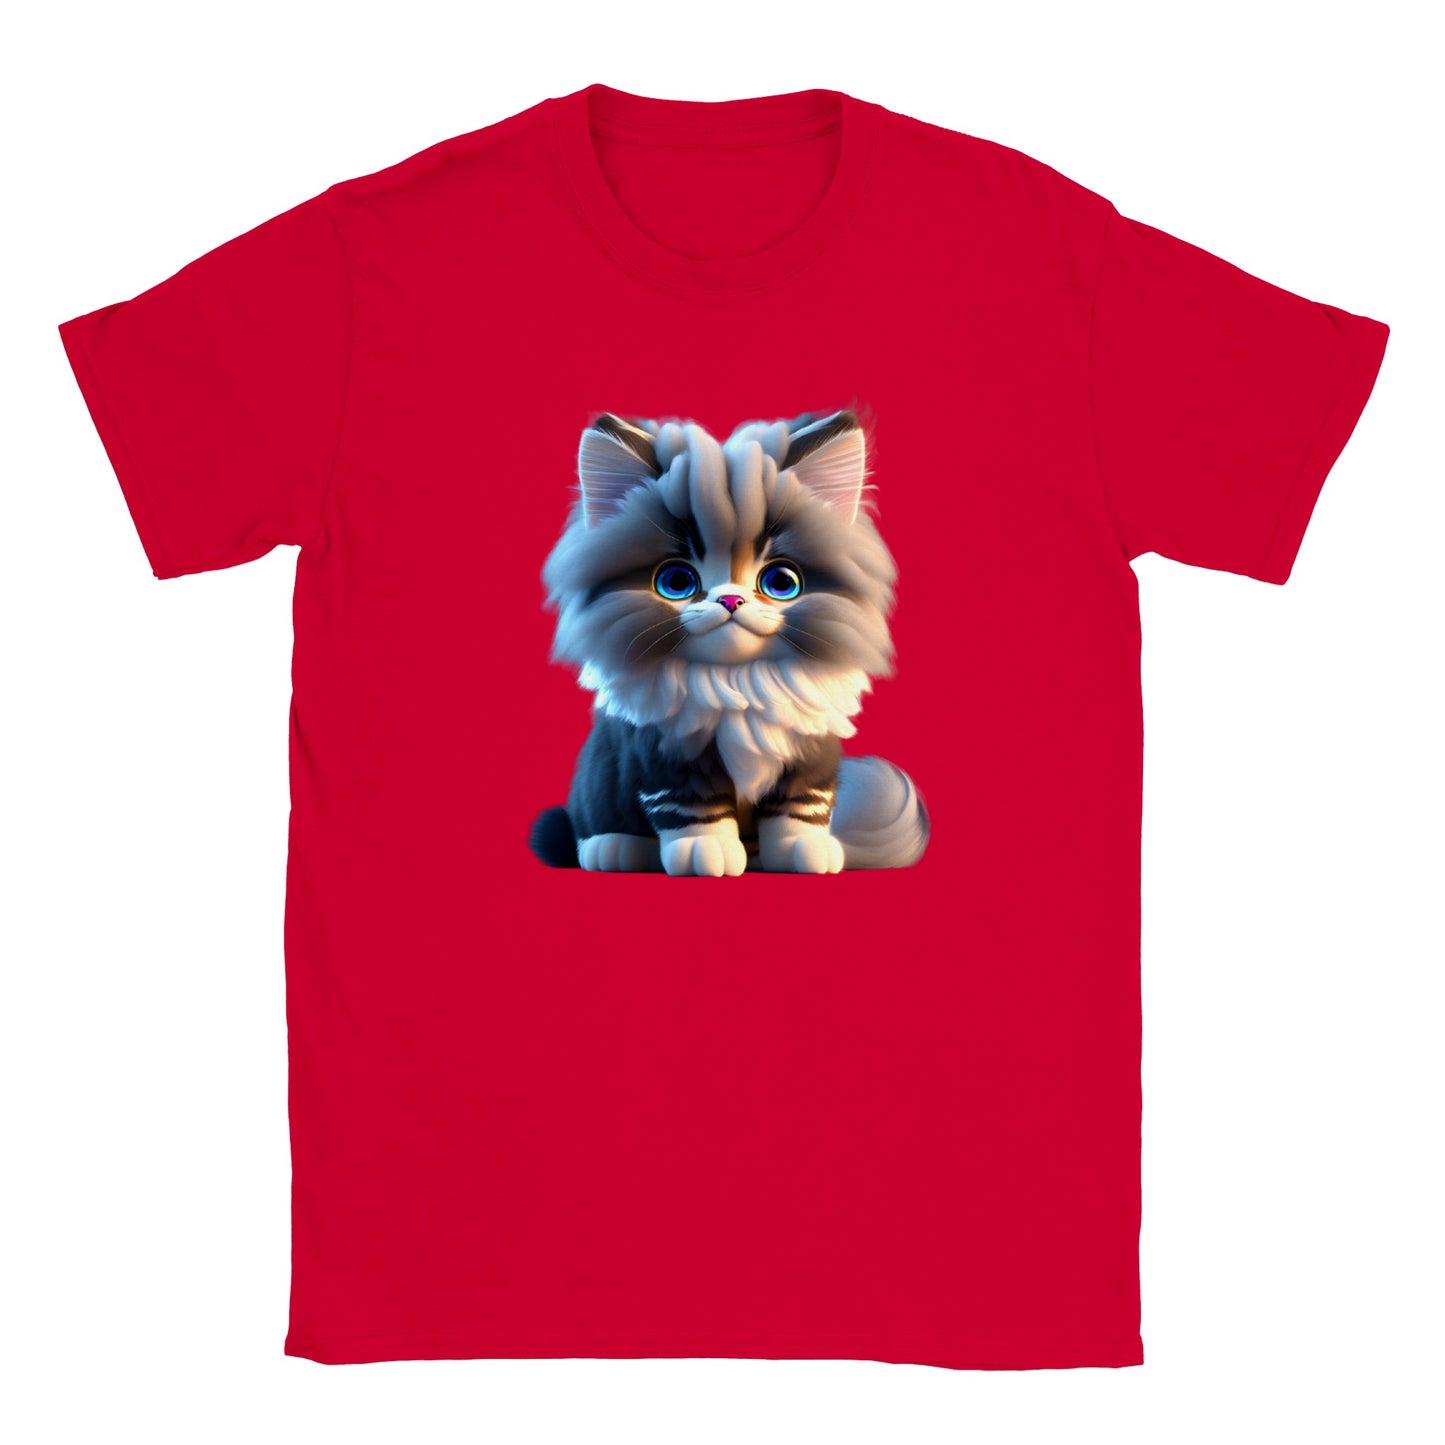 Adorable, Cool, Cute Cats and Kittens Toy - Classic Kids Crewneck T-Shirt 4